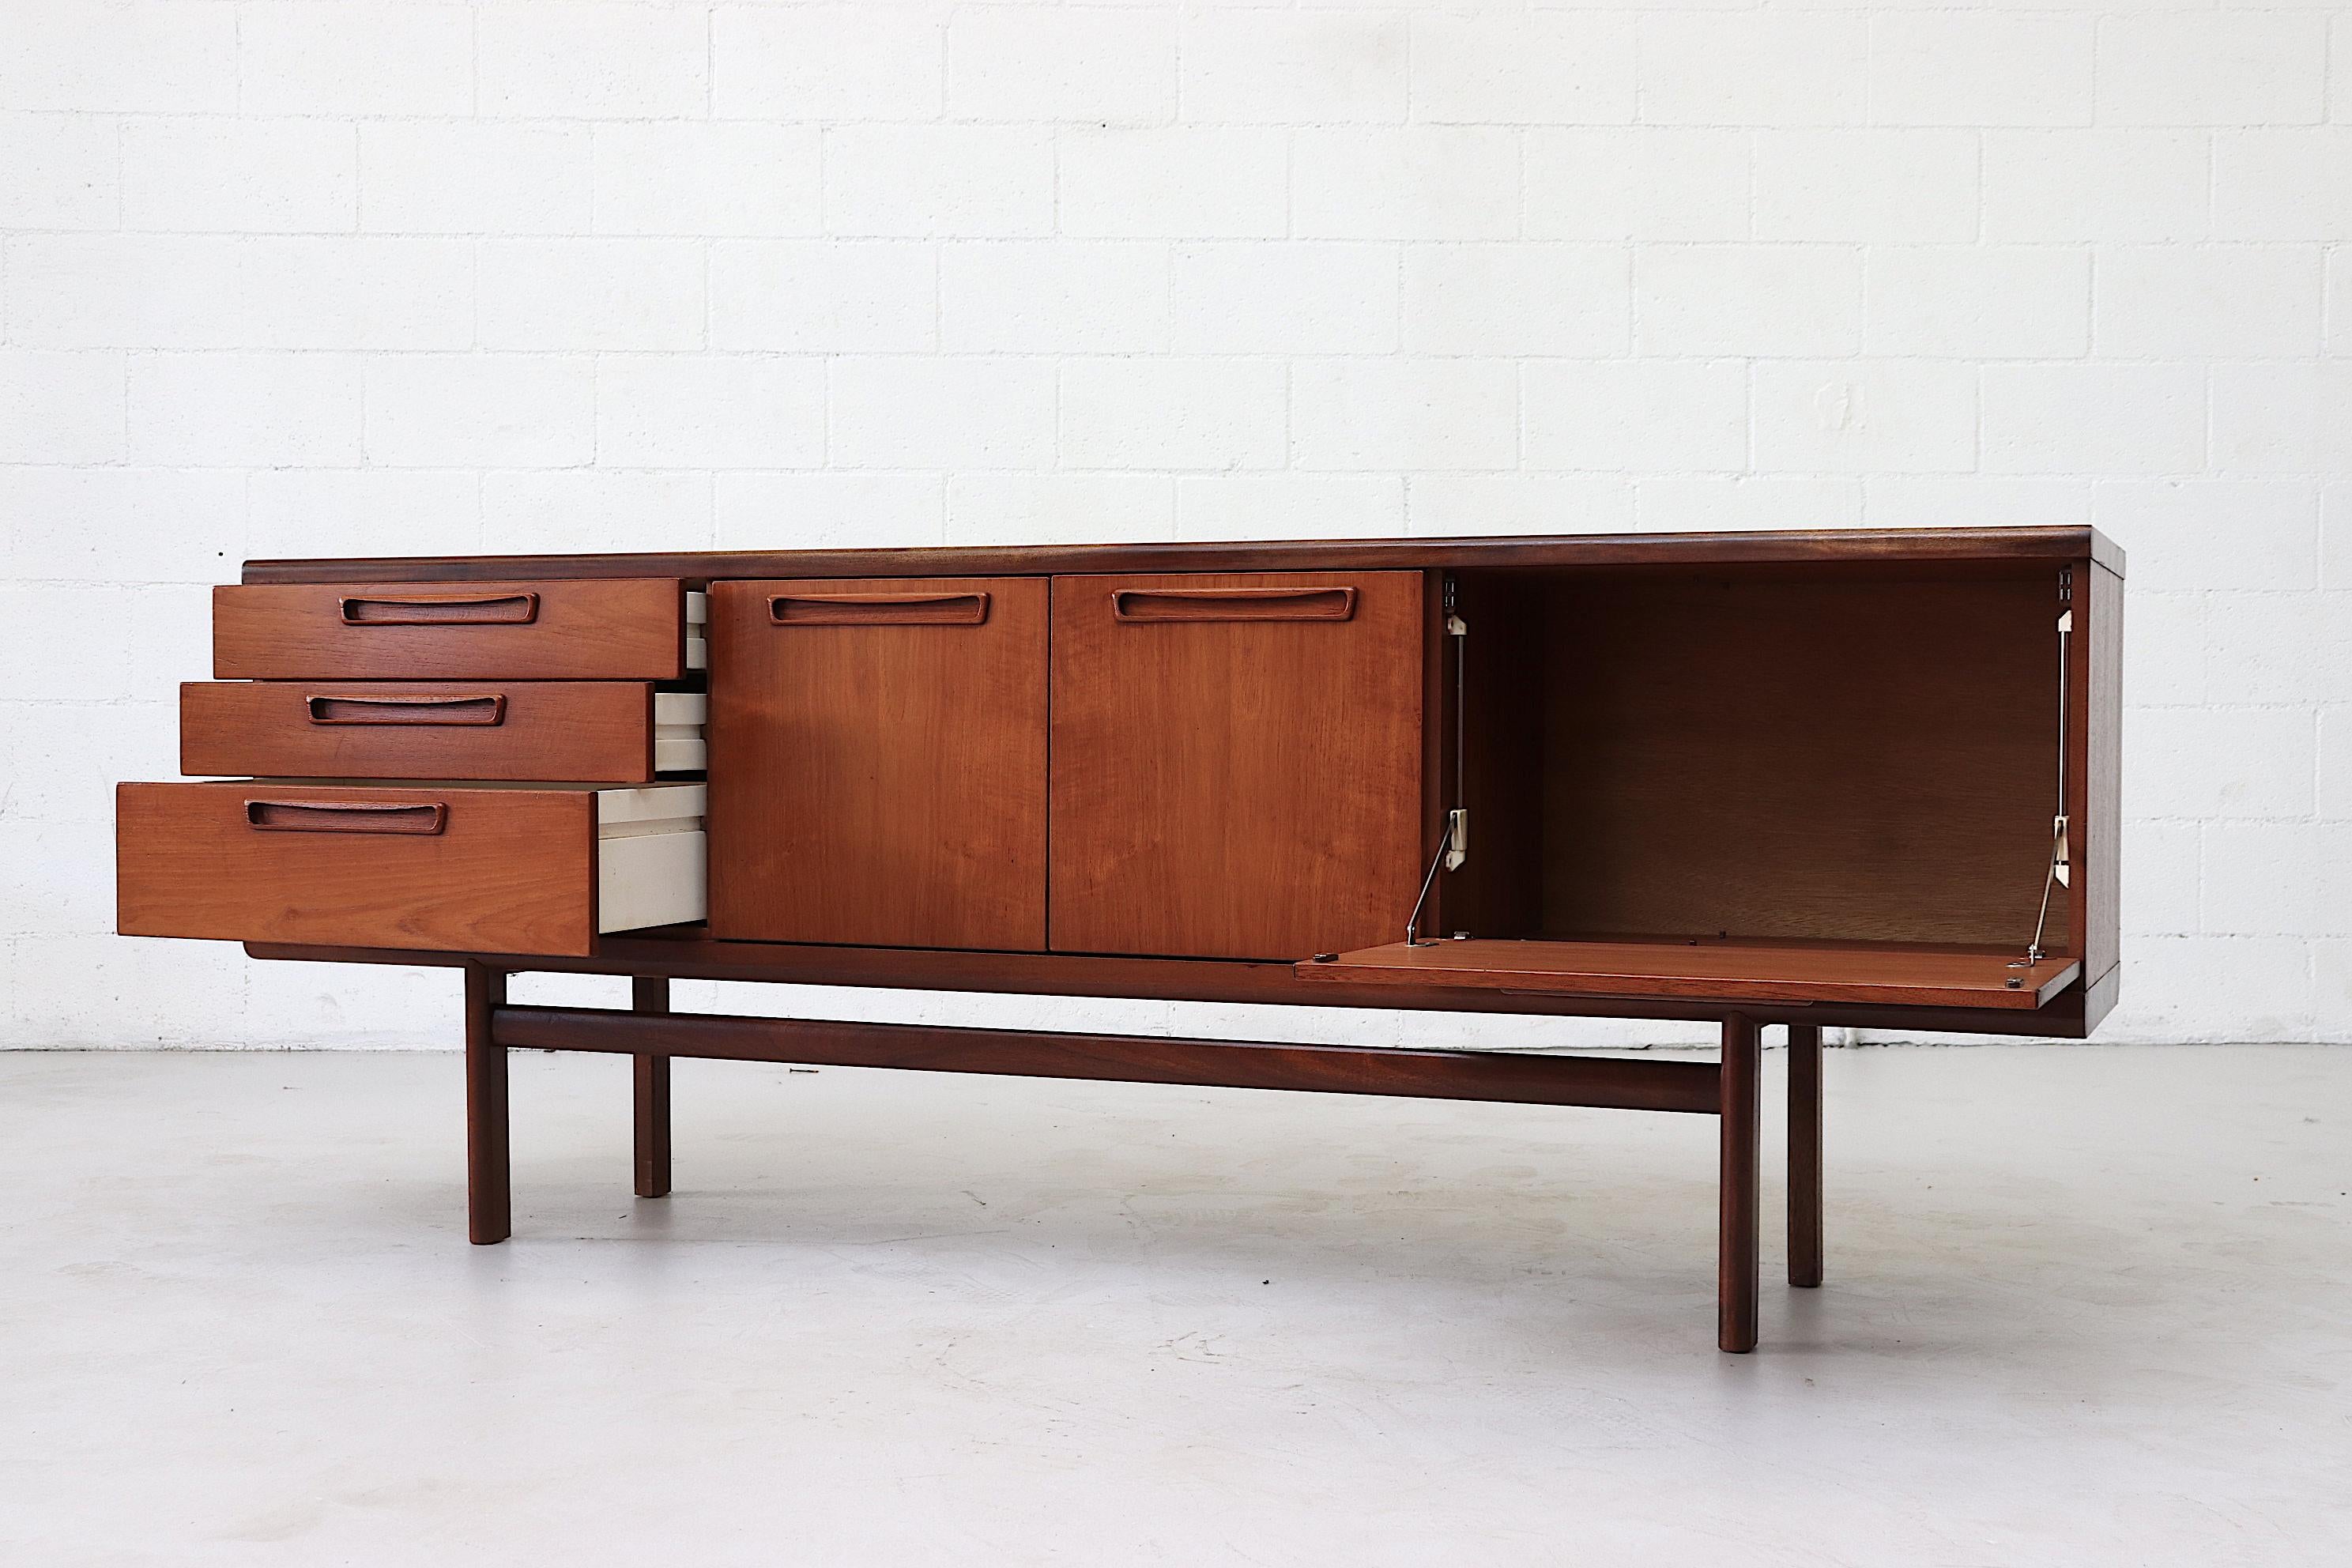 Beautiful midcentury teak credenza equipped with three stacked drawers a centre cabinet with built-in shelf and additional large drop down cabinet. Original condition with light refinishing.